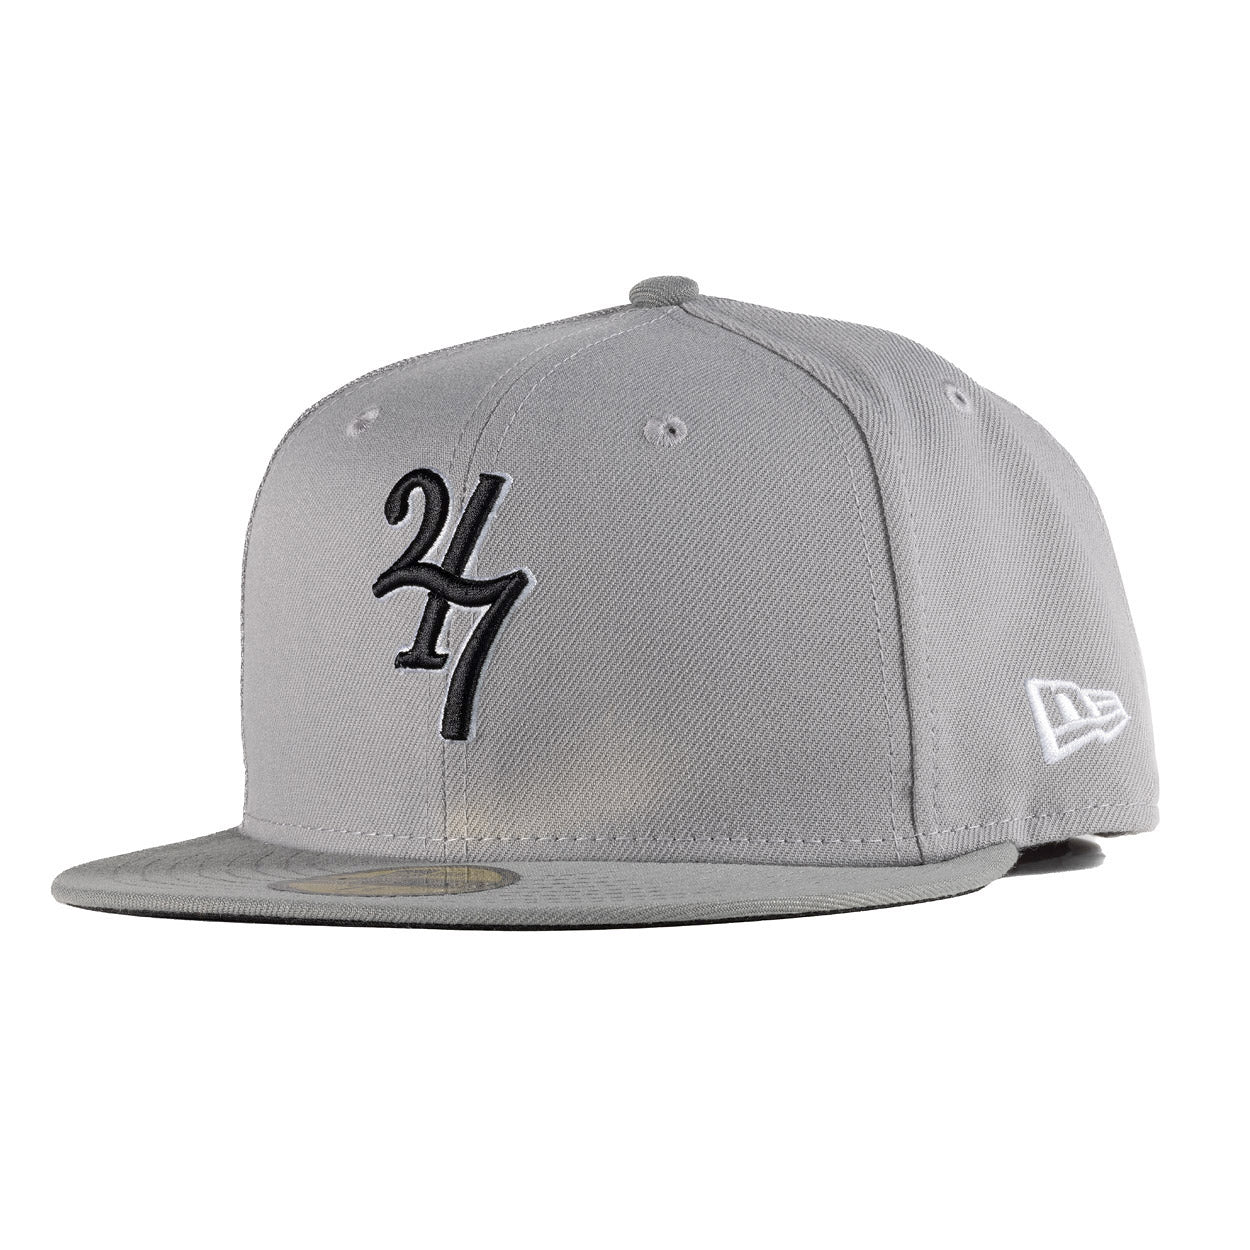 24/7 Grayscale New Era Fitted